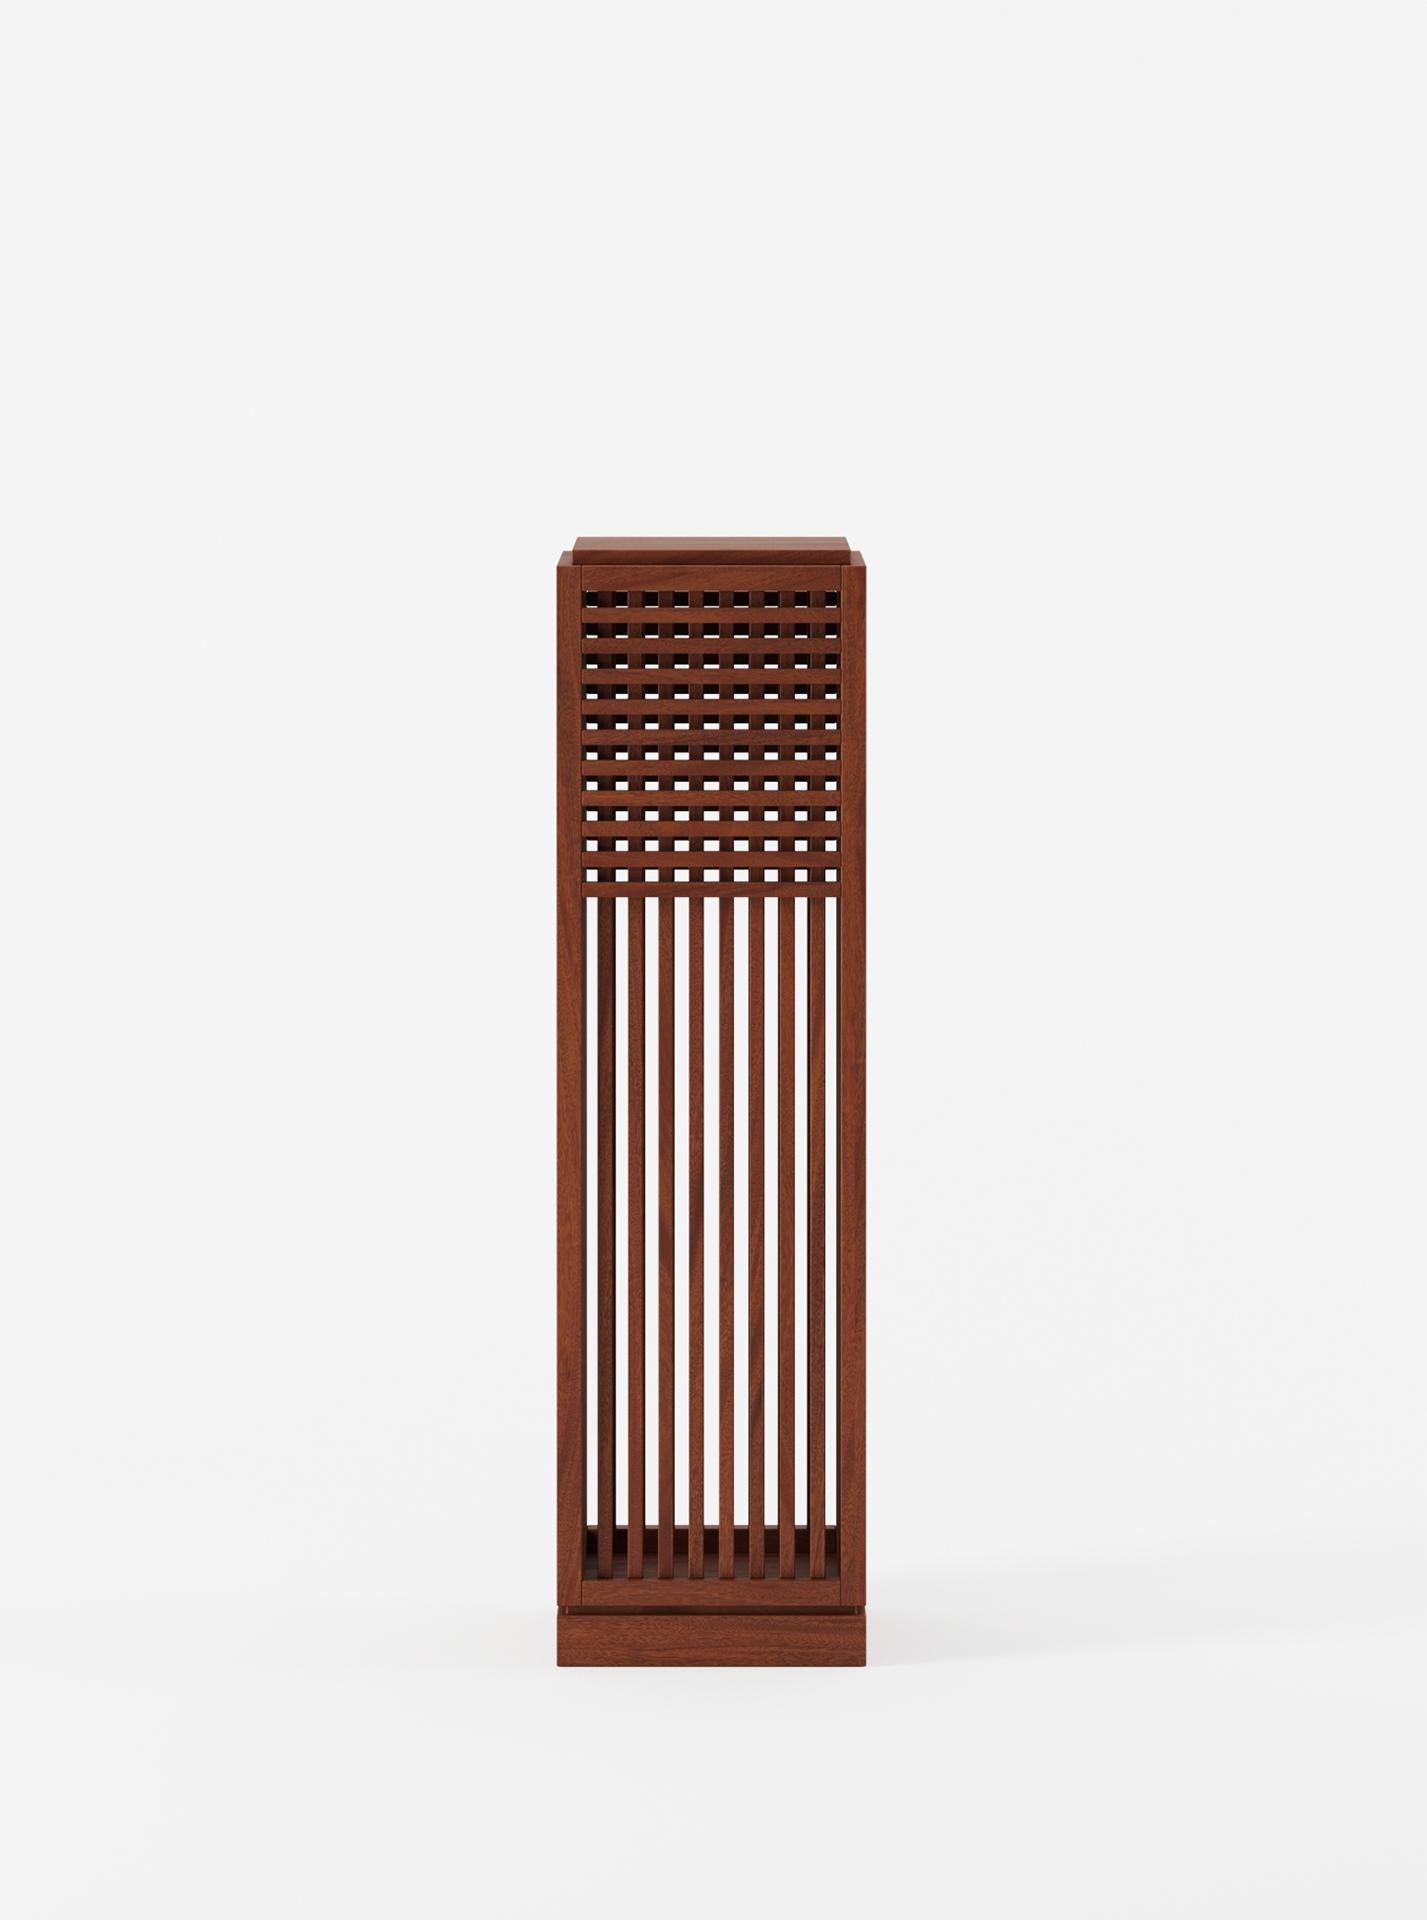 Minimalist Riviera Plinth Tall in Oiled African Mahogany Designed by Yaniv Chen for Lemon For Sale